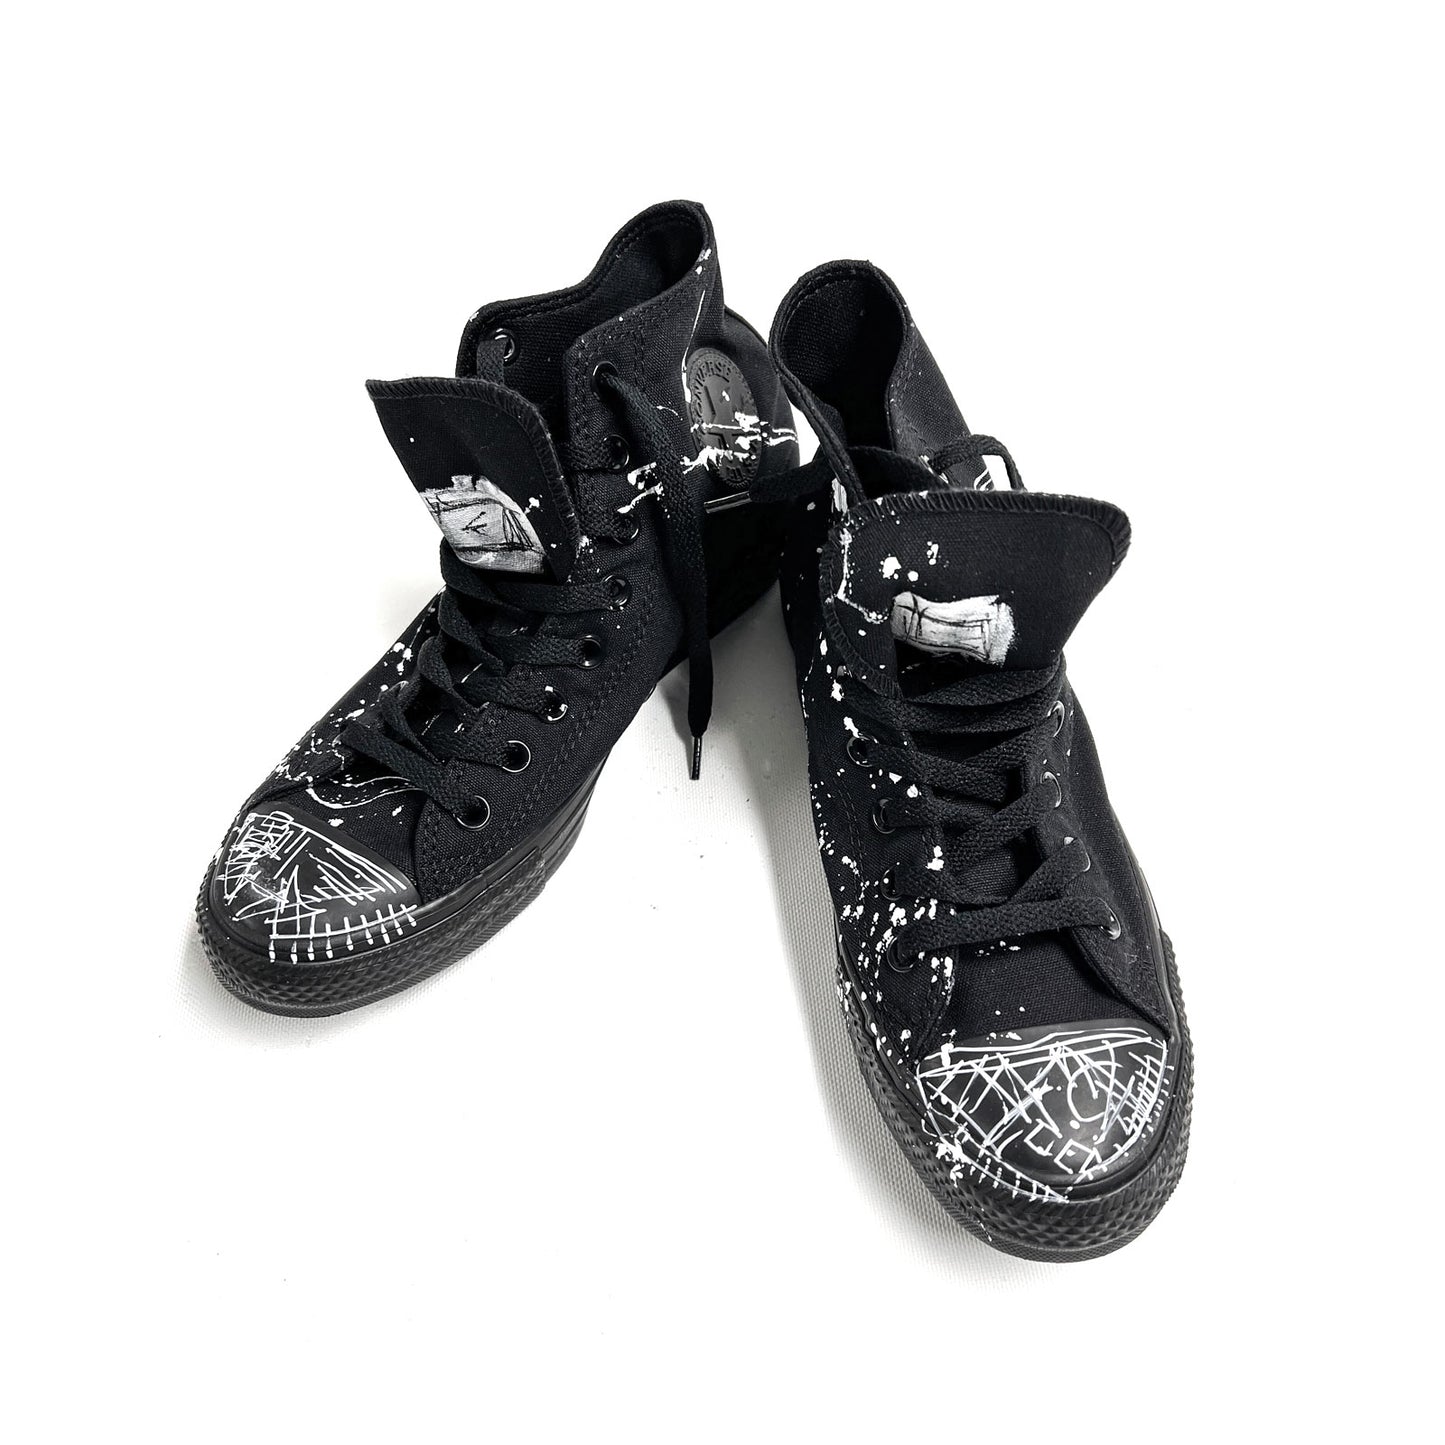 Converse High Tops in Hand Painted Black